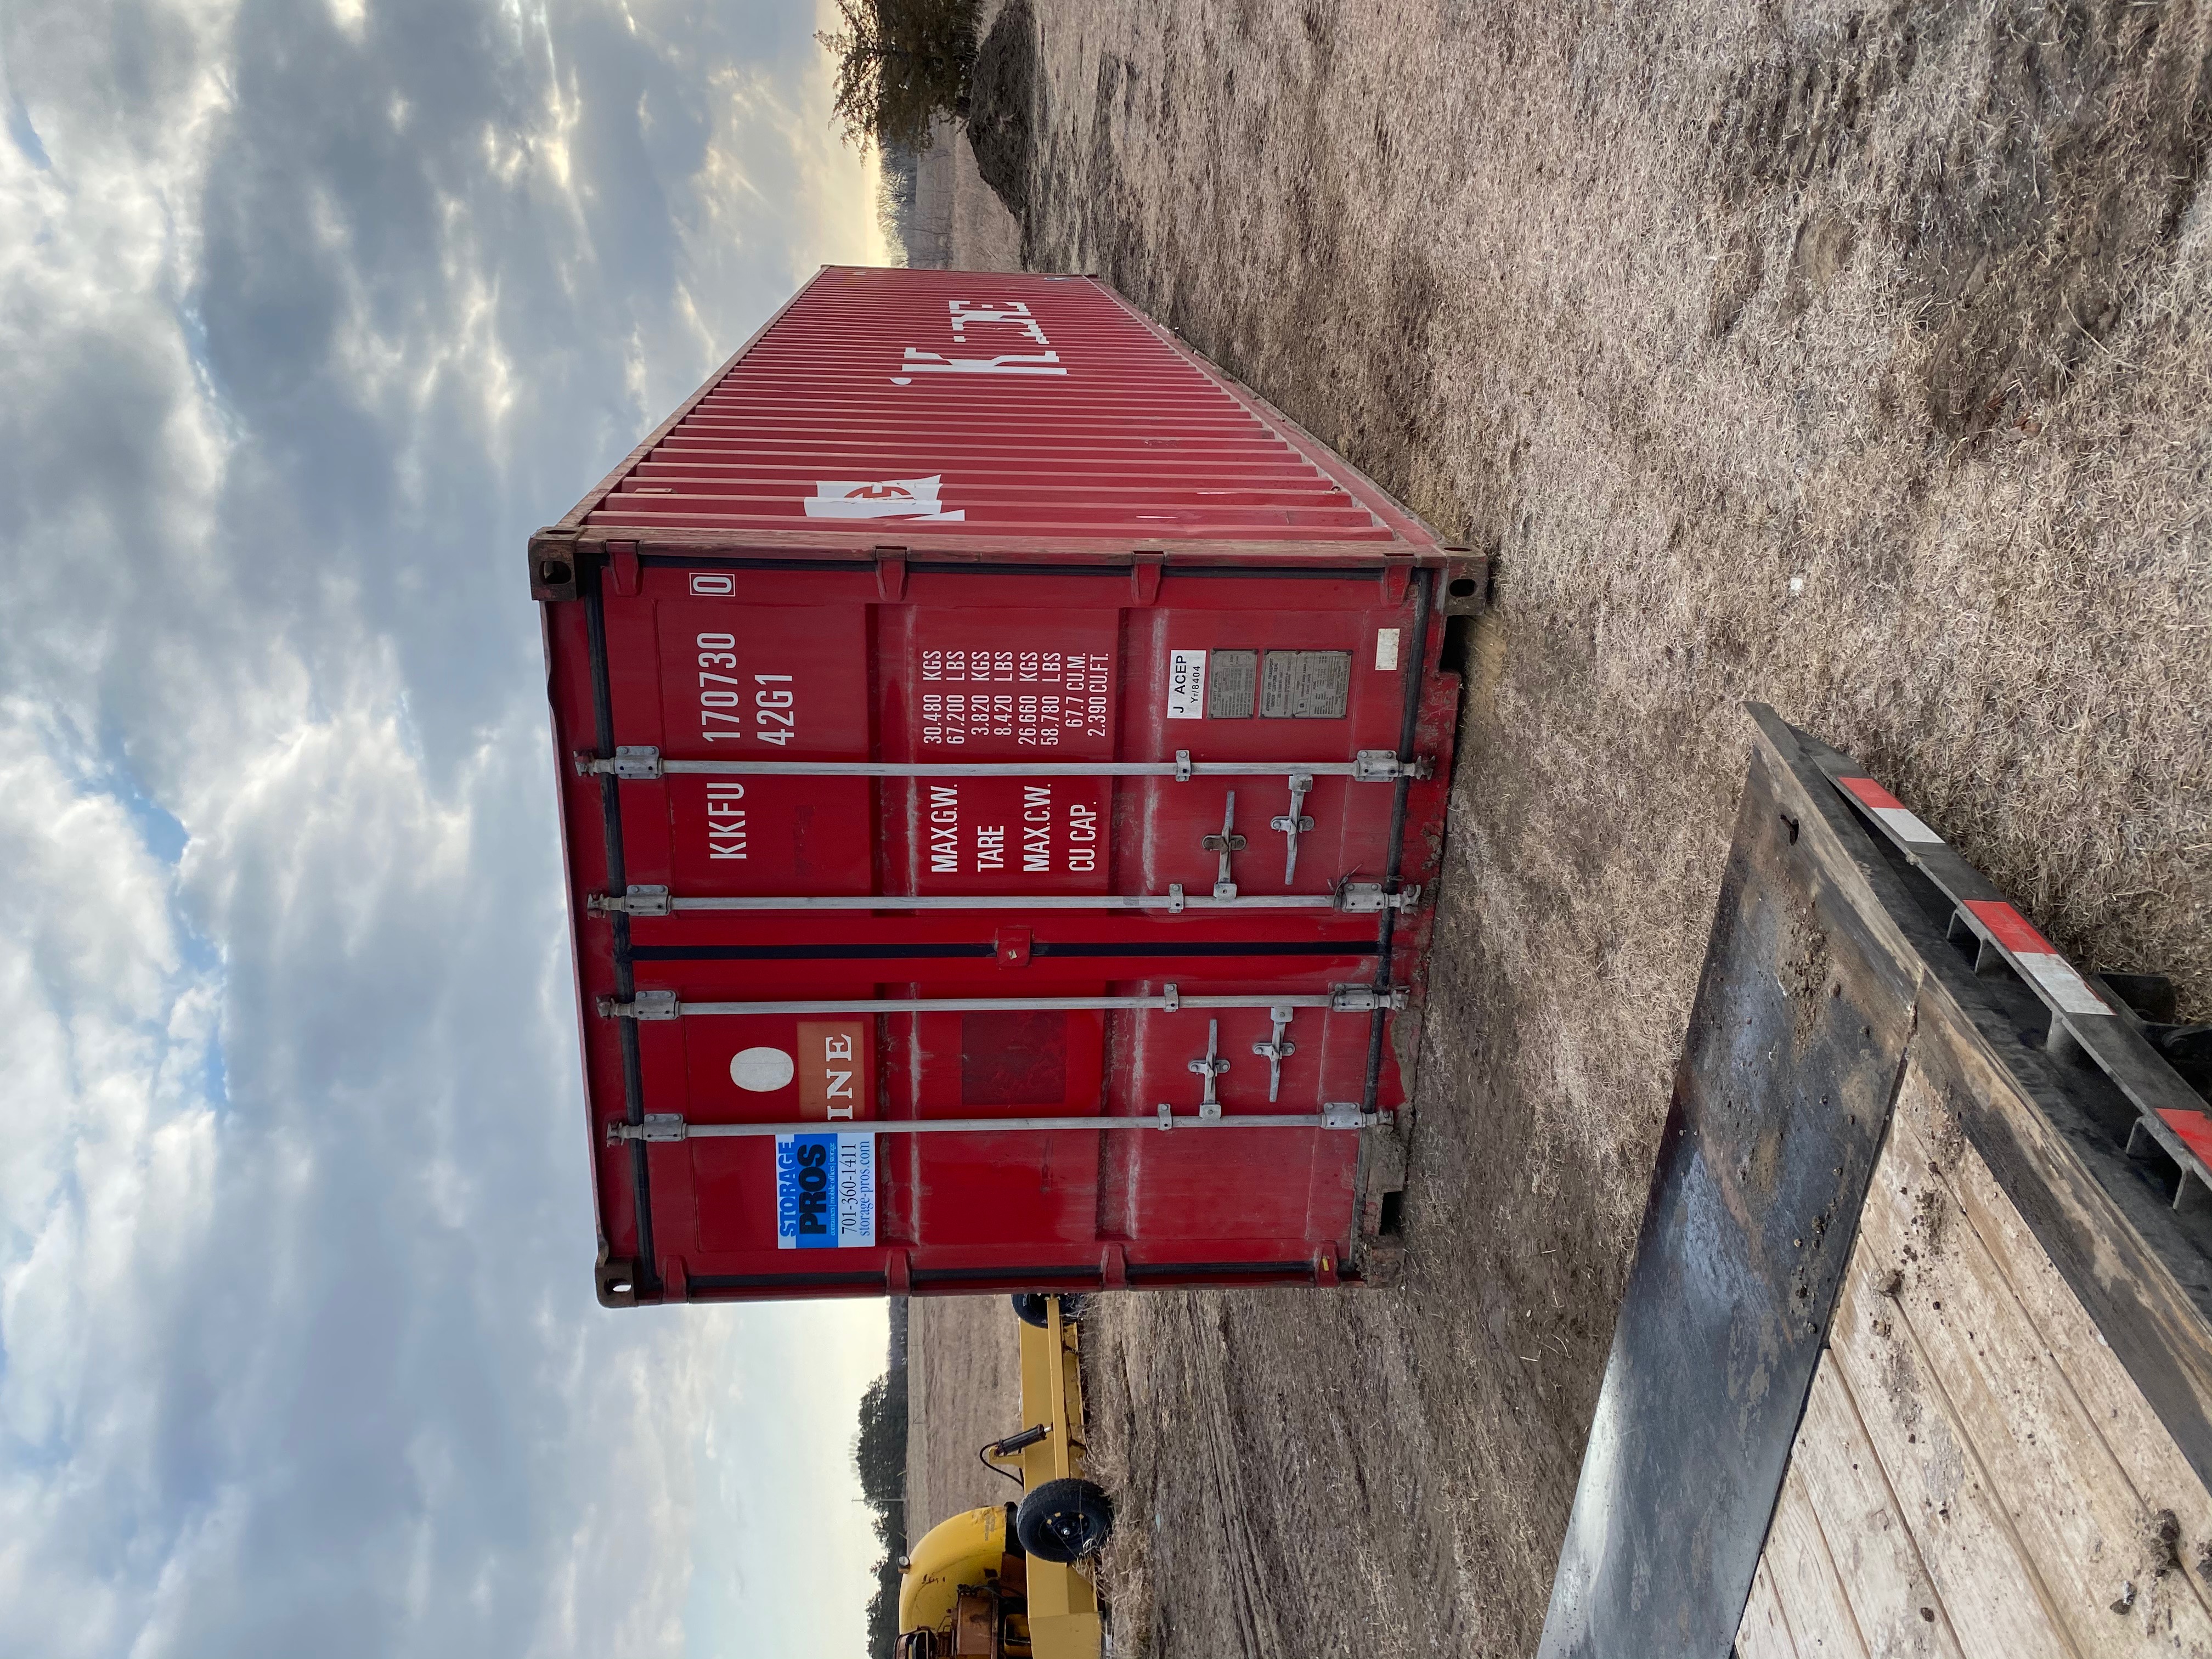 Portable Storage Containers for Sale in MN WI & Chicago